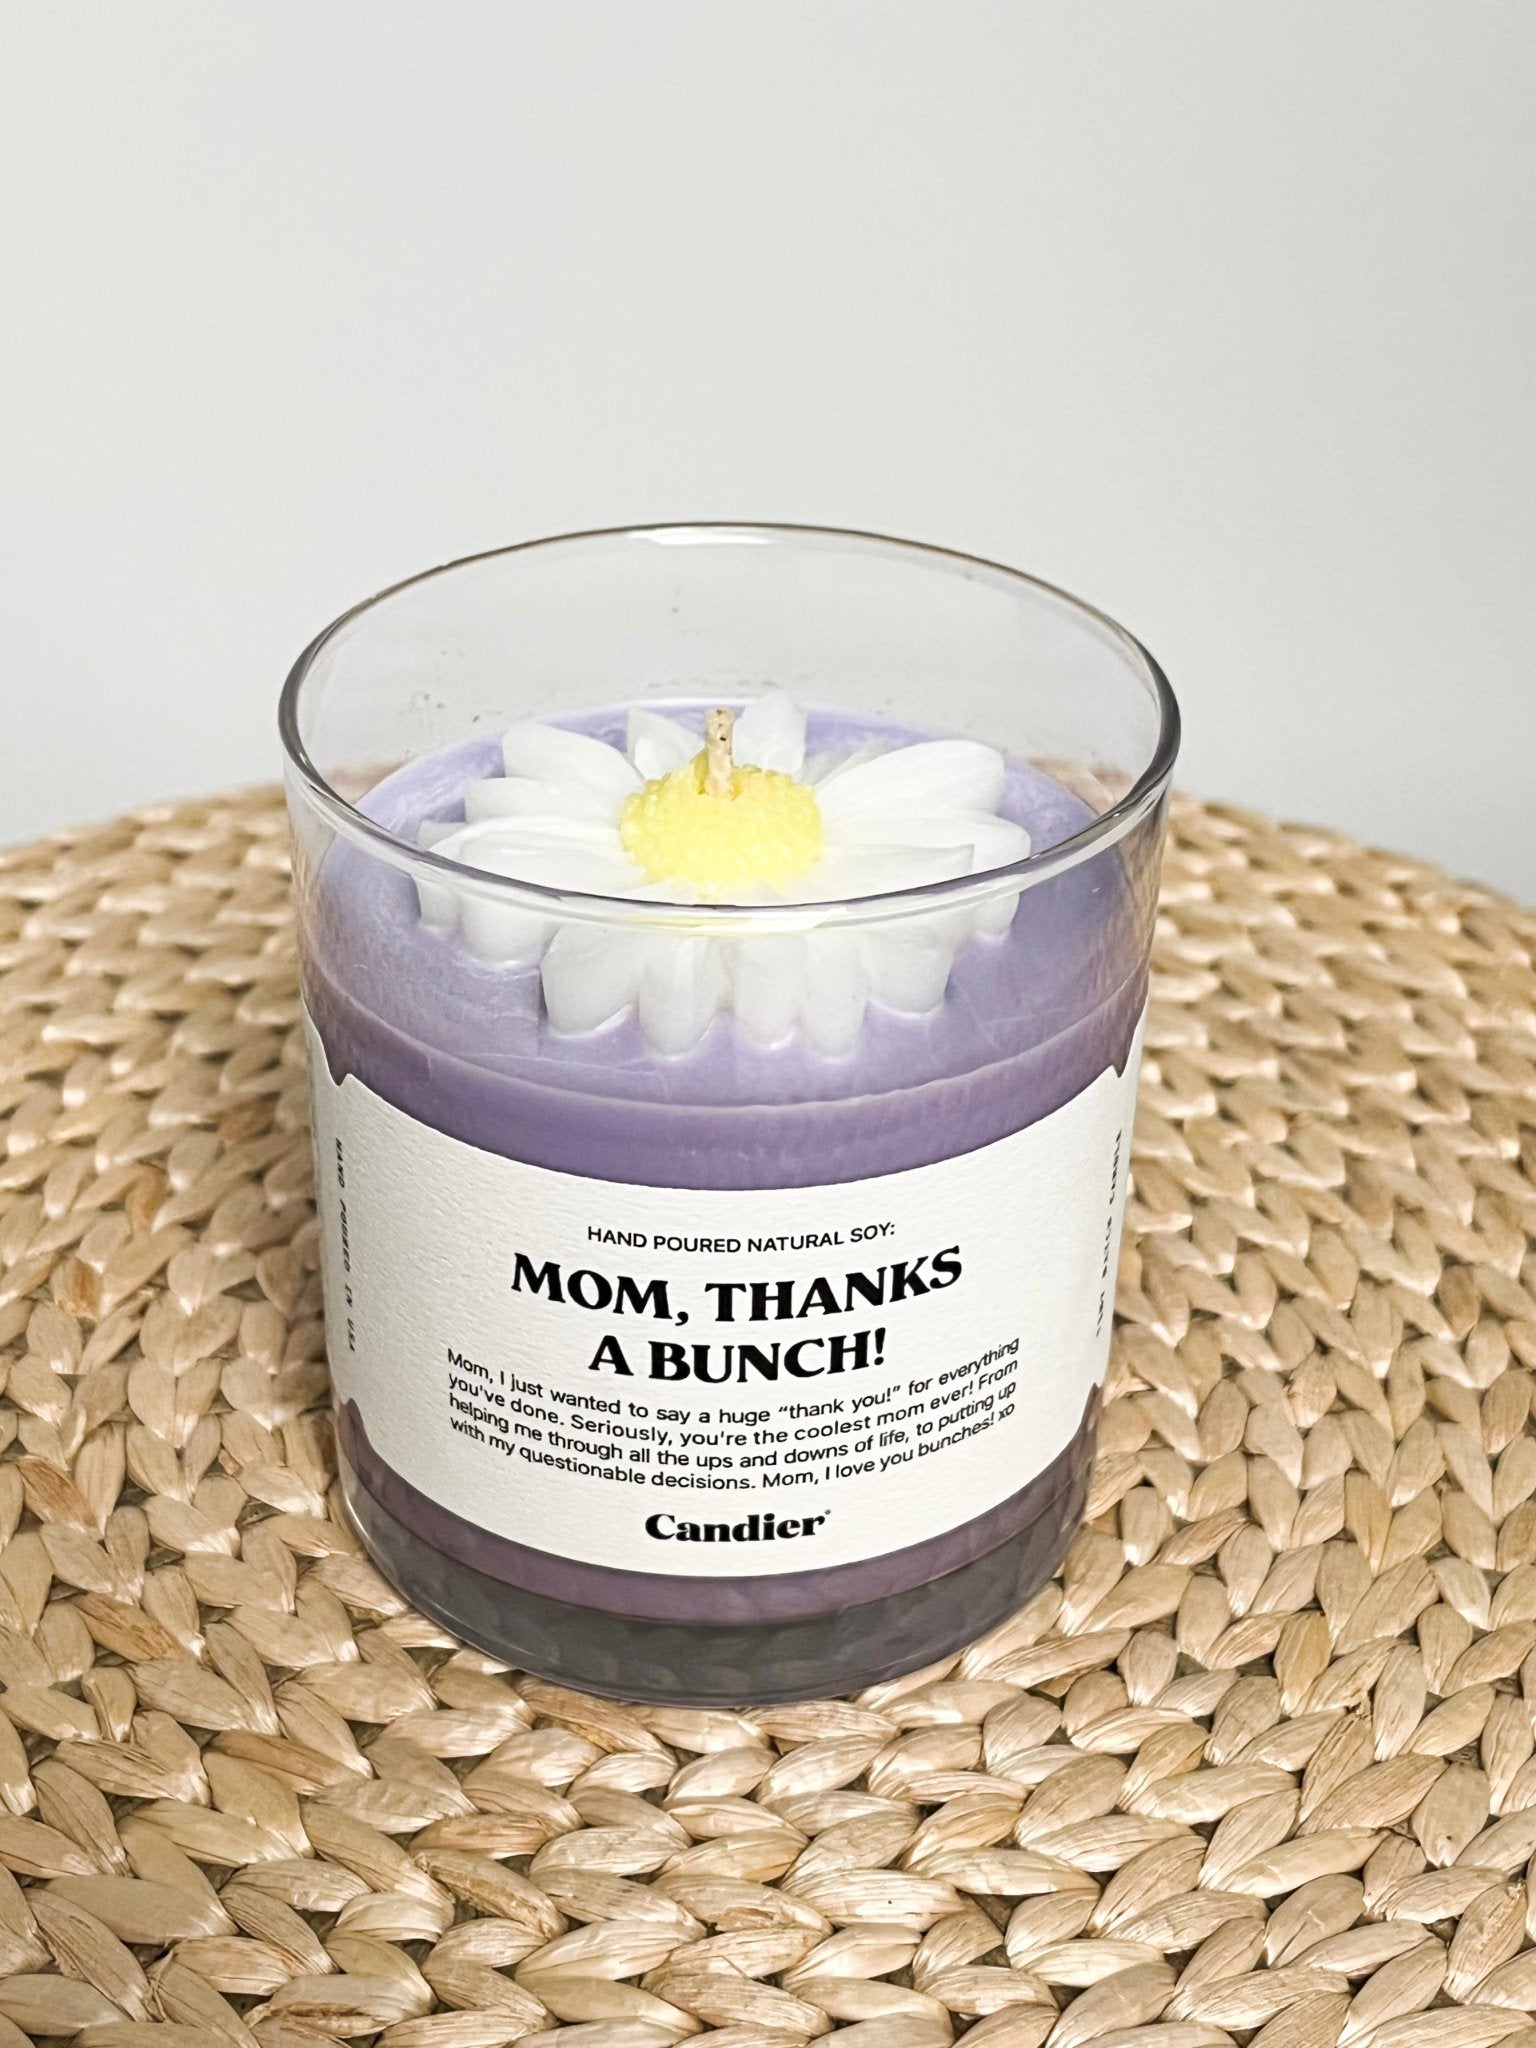 Mom thanks a bunch candle 9 oz - Cute candle - Cute Mom Gift Ideas at Lush Fashion Lounge in Oklahoma